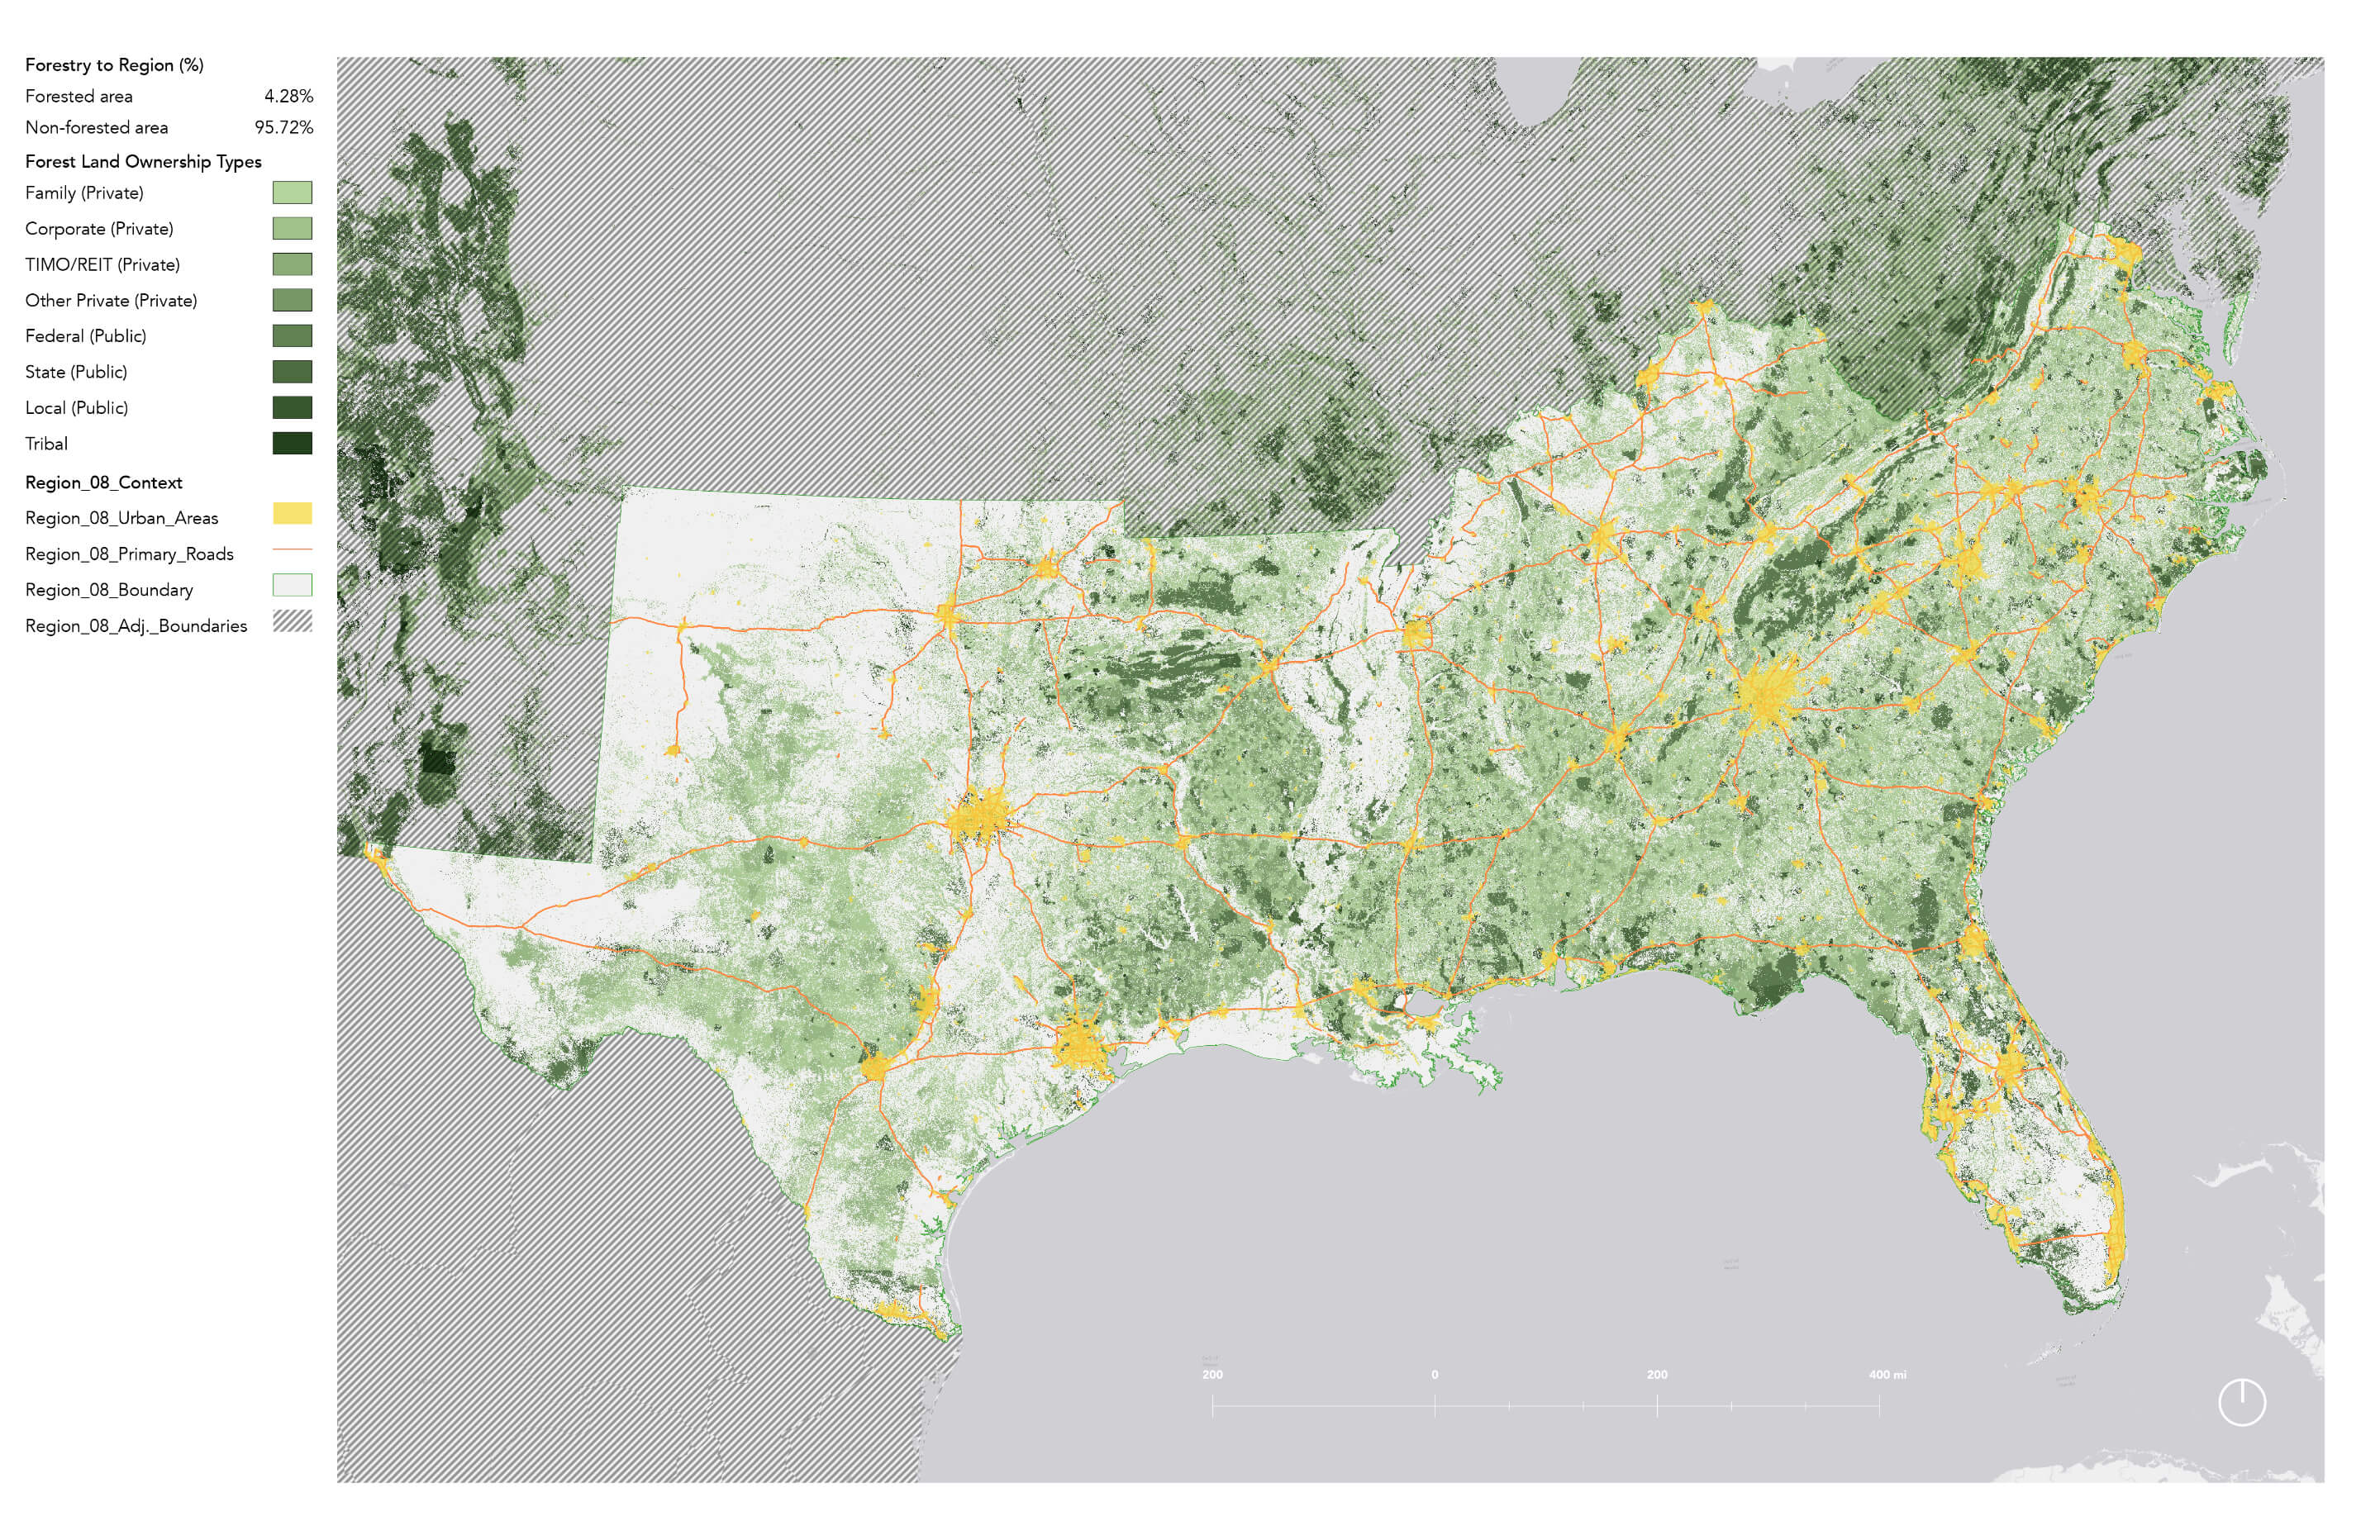 A map of timber production across the us